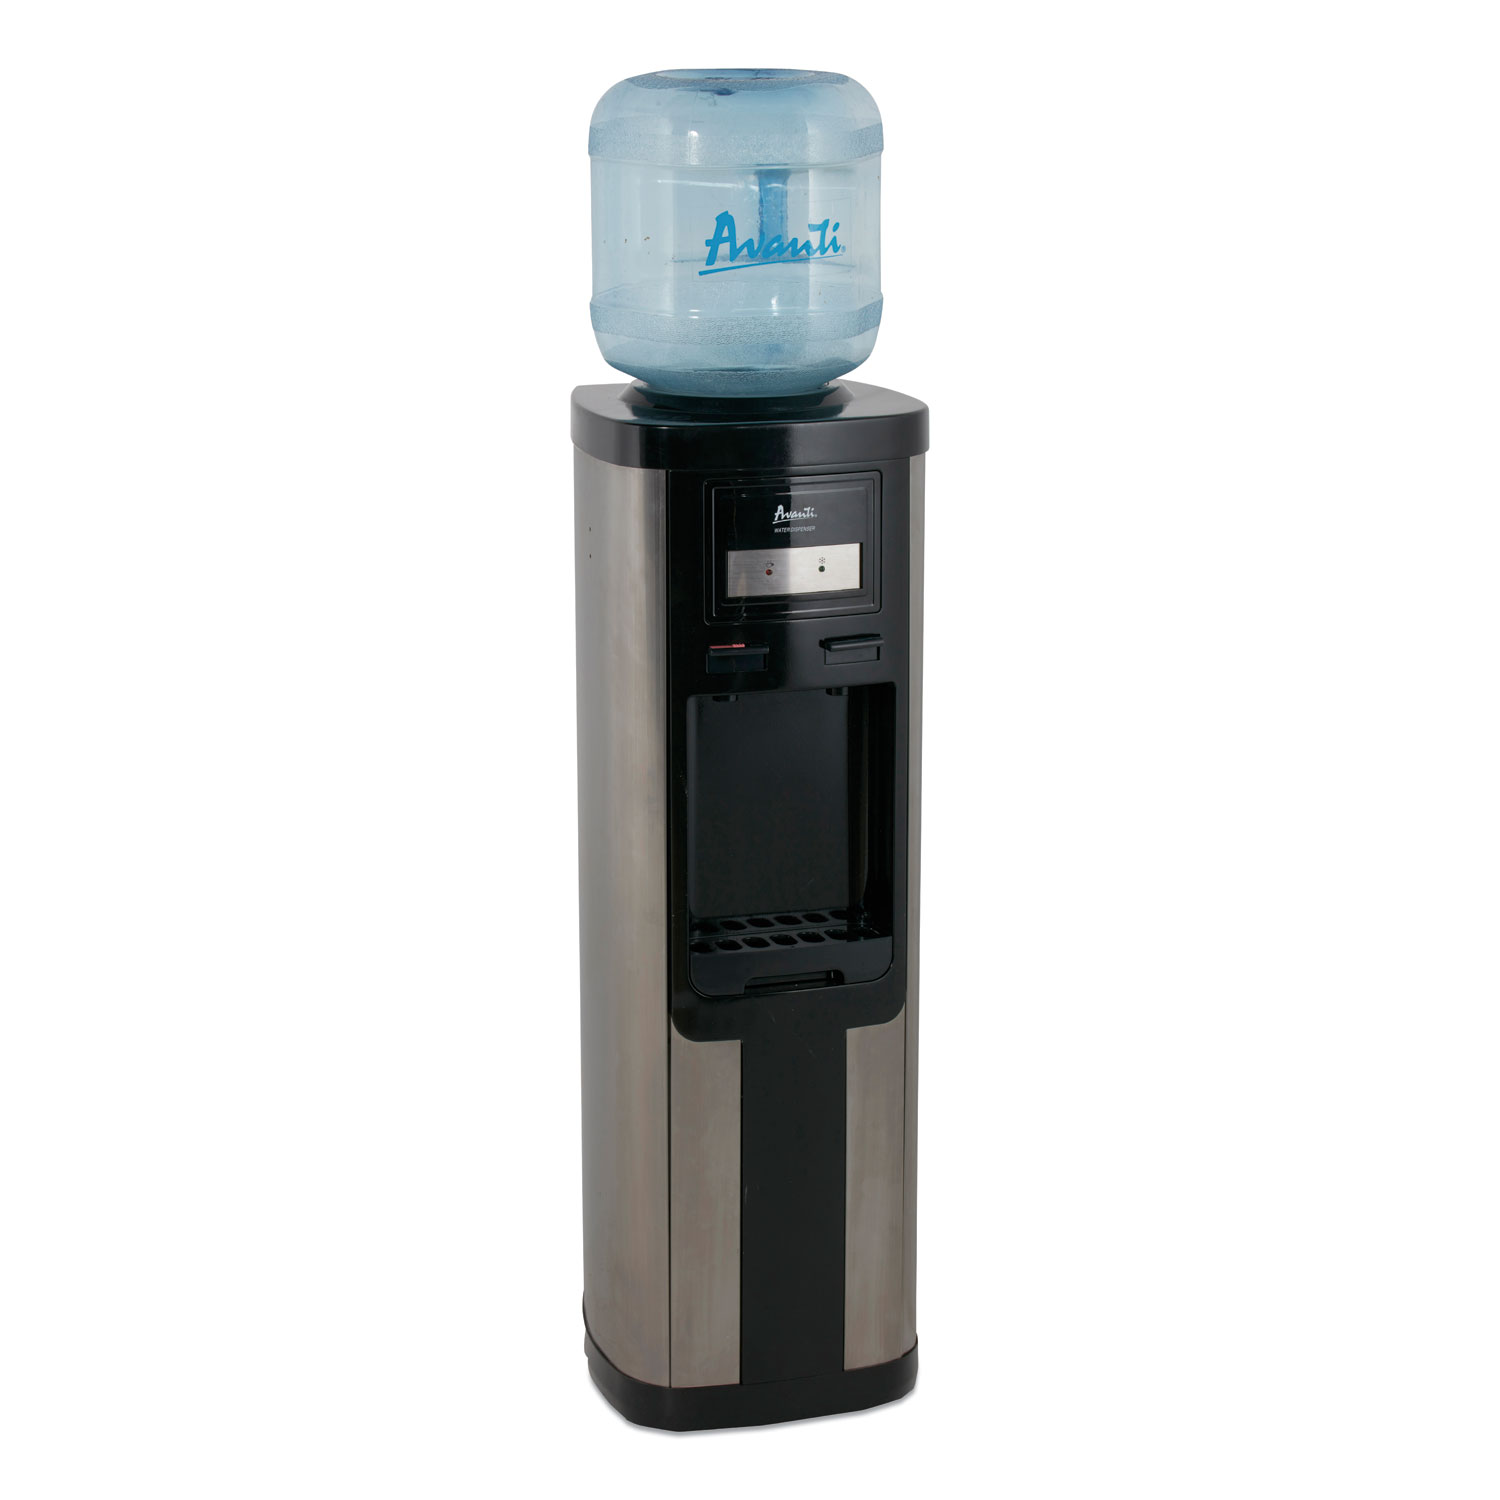  Avanti WDC760I3S Hot and Cold Water Dispenser, 3-5 gal, 13 x 38.75, Stainless Steel (AVAWDC760I3S) 